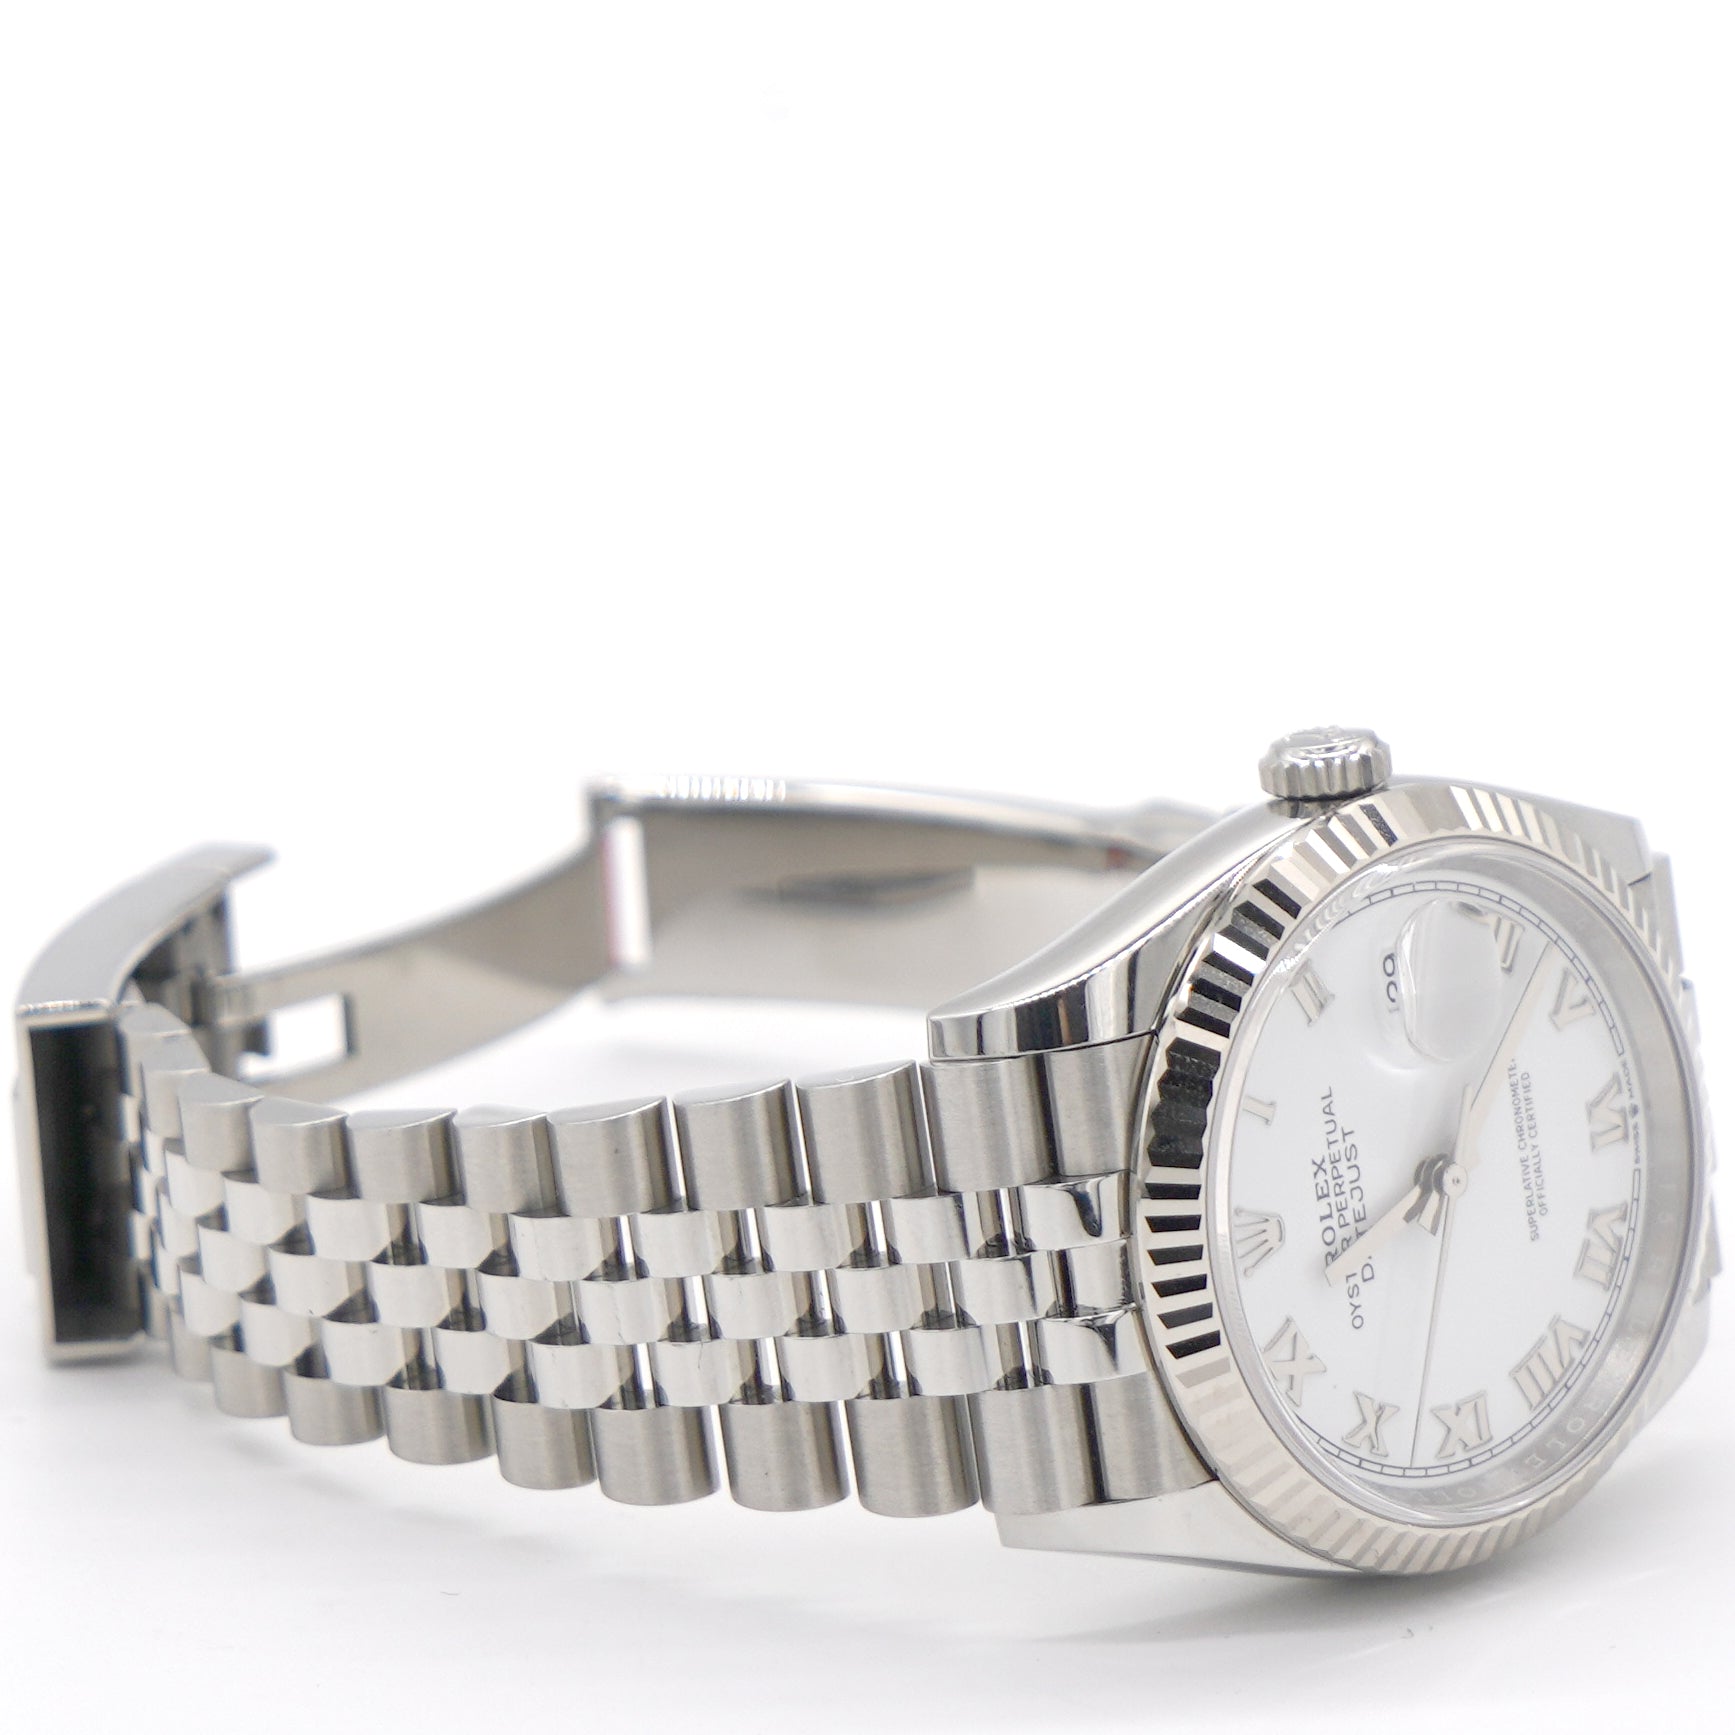 18K White Gold and Stainless Steel Datejust 36mm 126234